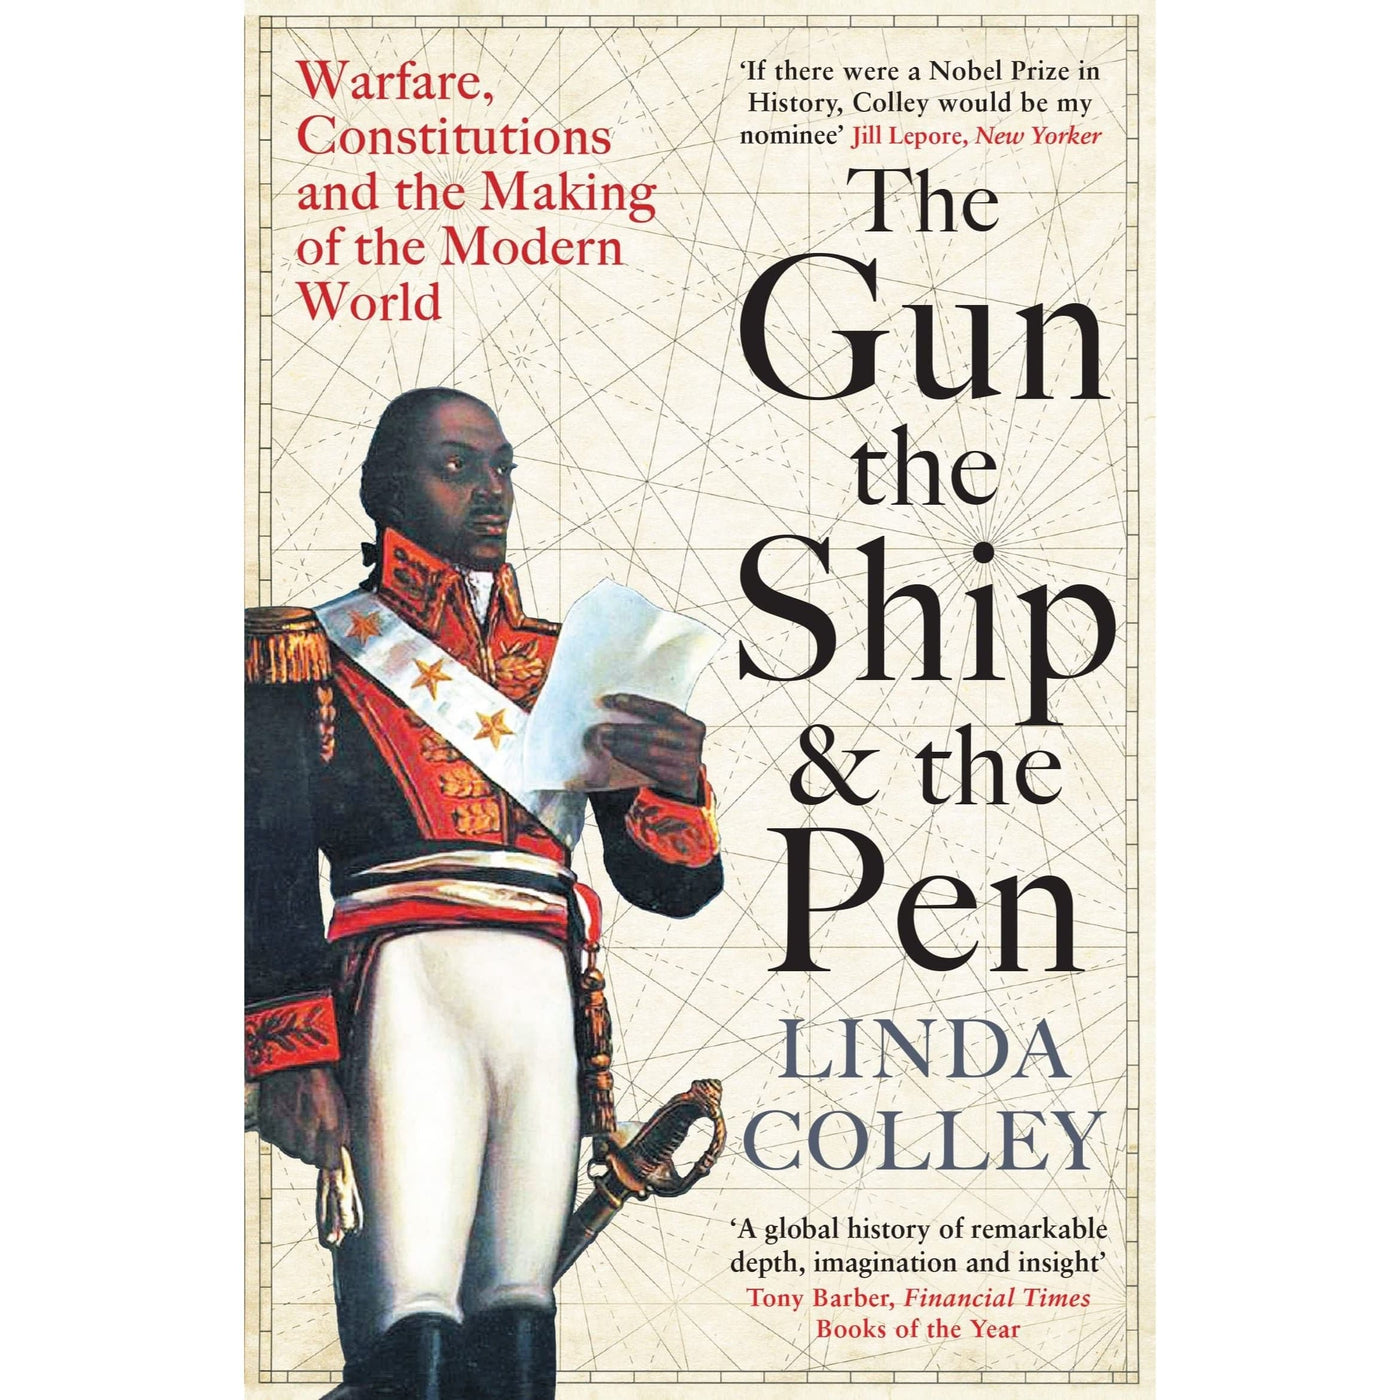 Linda Colley: The Gun, the Ship, and the Pen: Warfare, Constitutions, and the Making of the Modern World